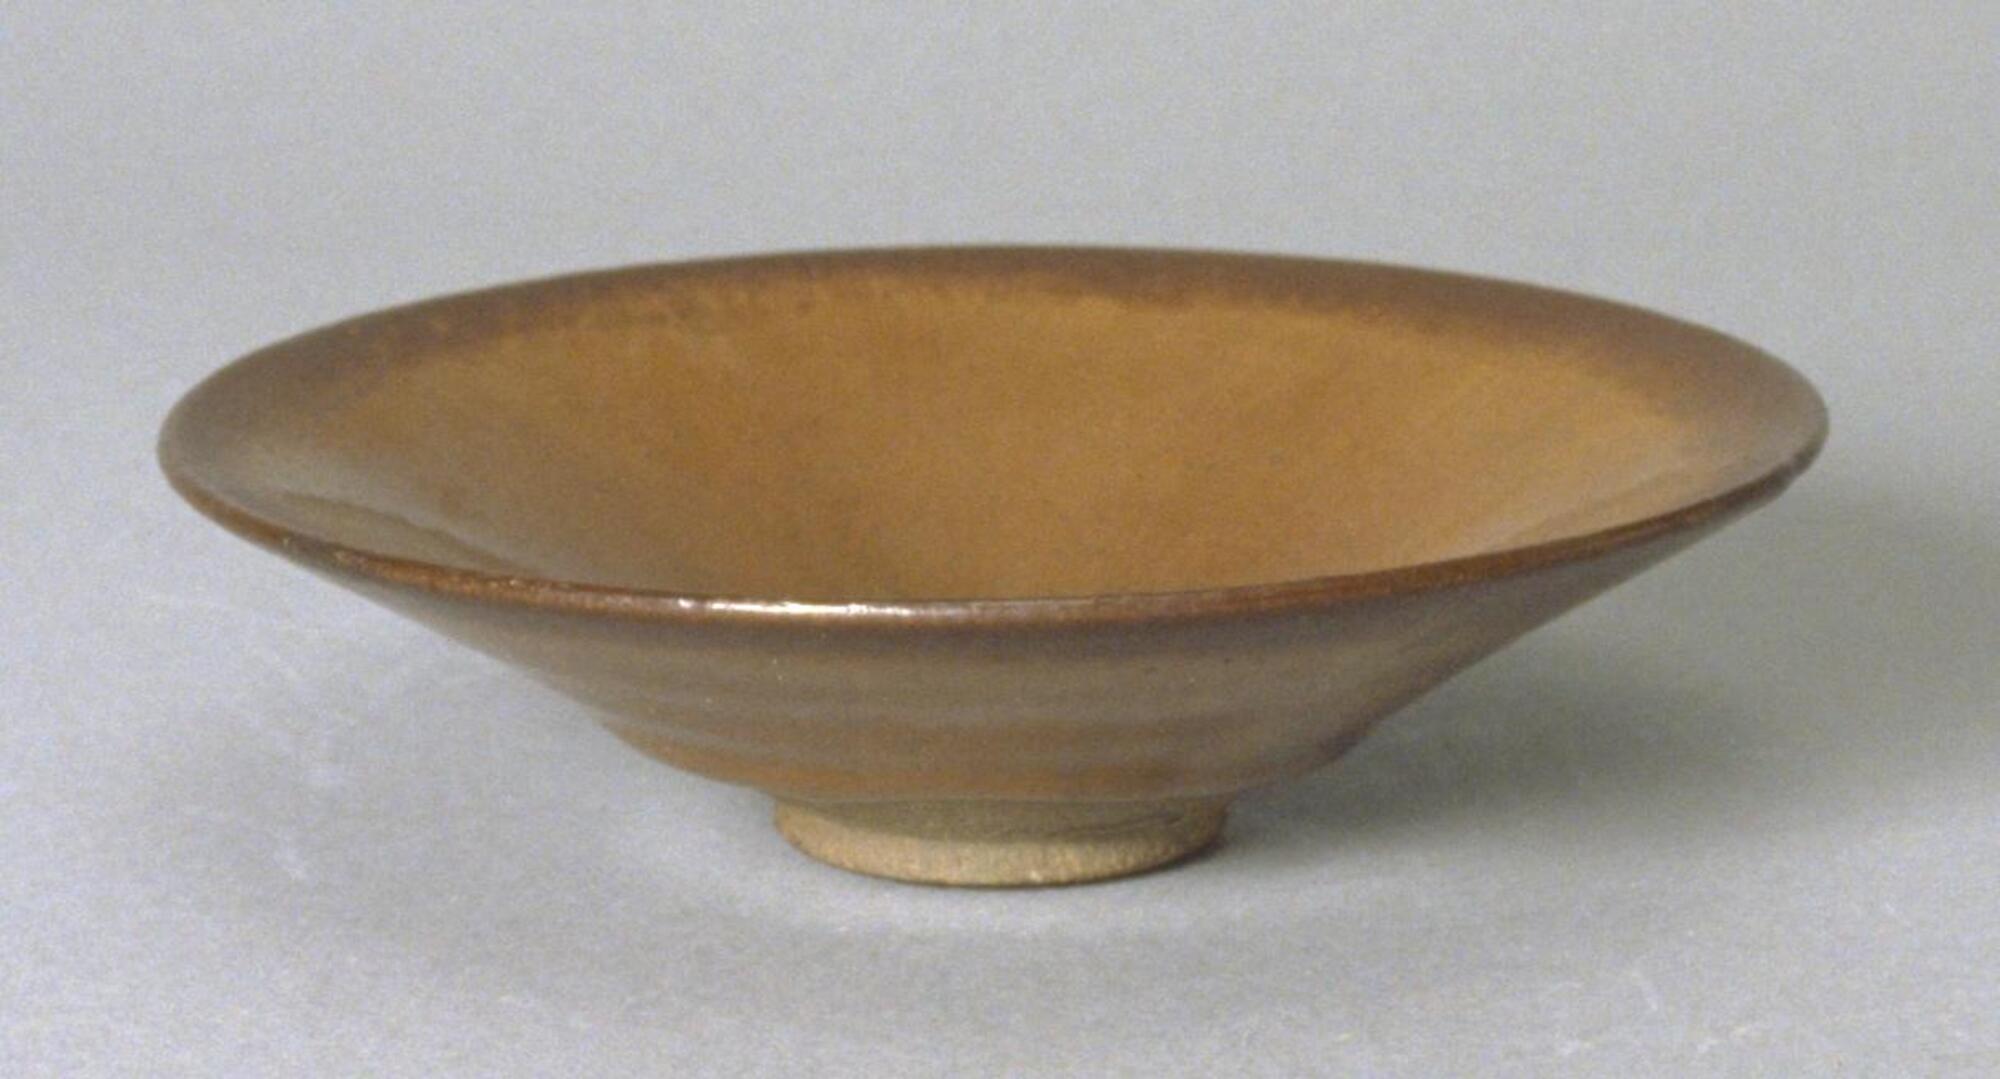 Shallow, wide conical light grey stoneware bowl on a tall straight foot ring, covered in a dark brown-black glaze with intense, and copious russet hare's fur (兔毫盏 <em>tuhao zhan</em>) markings.